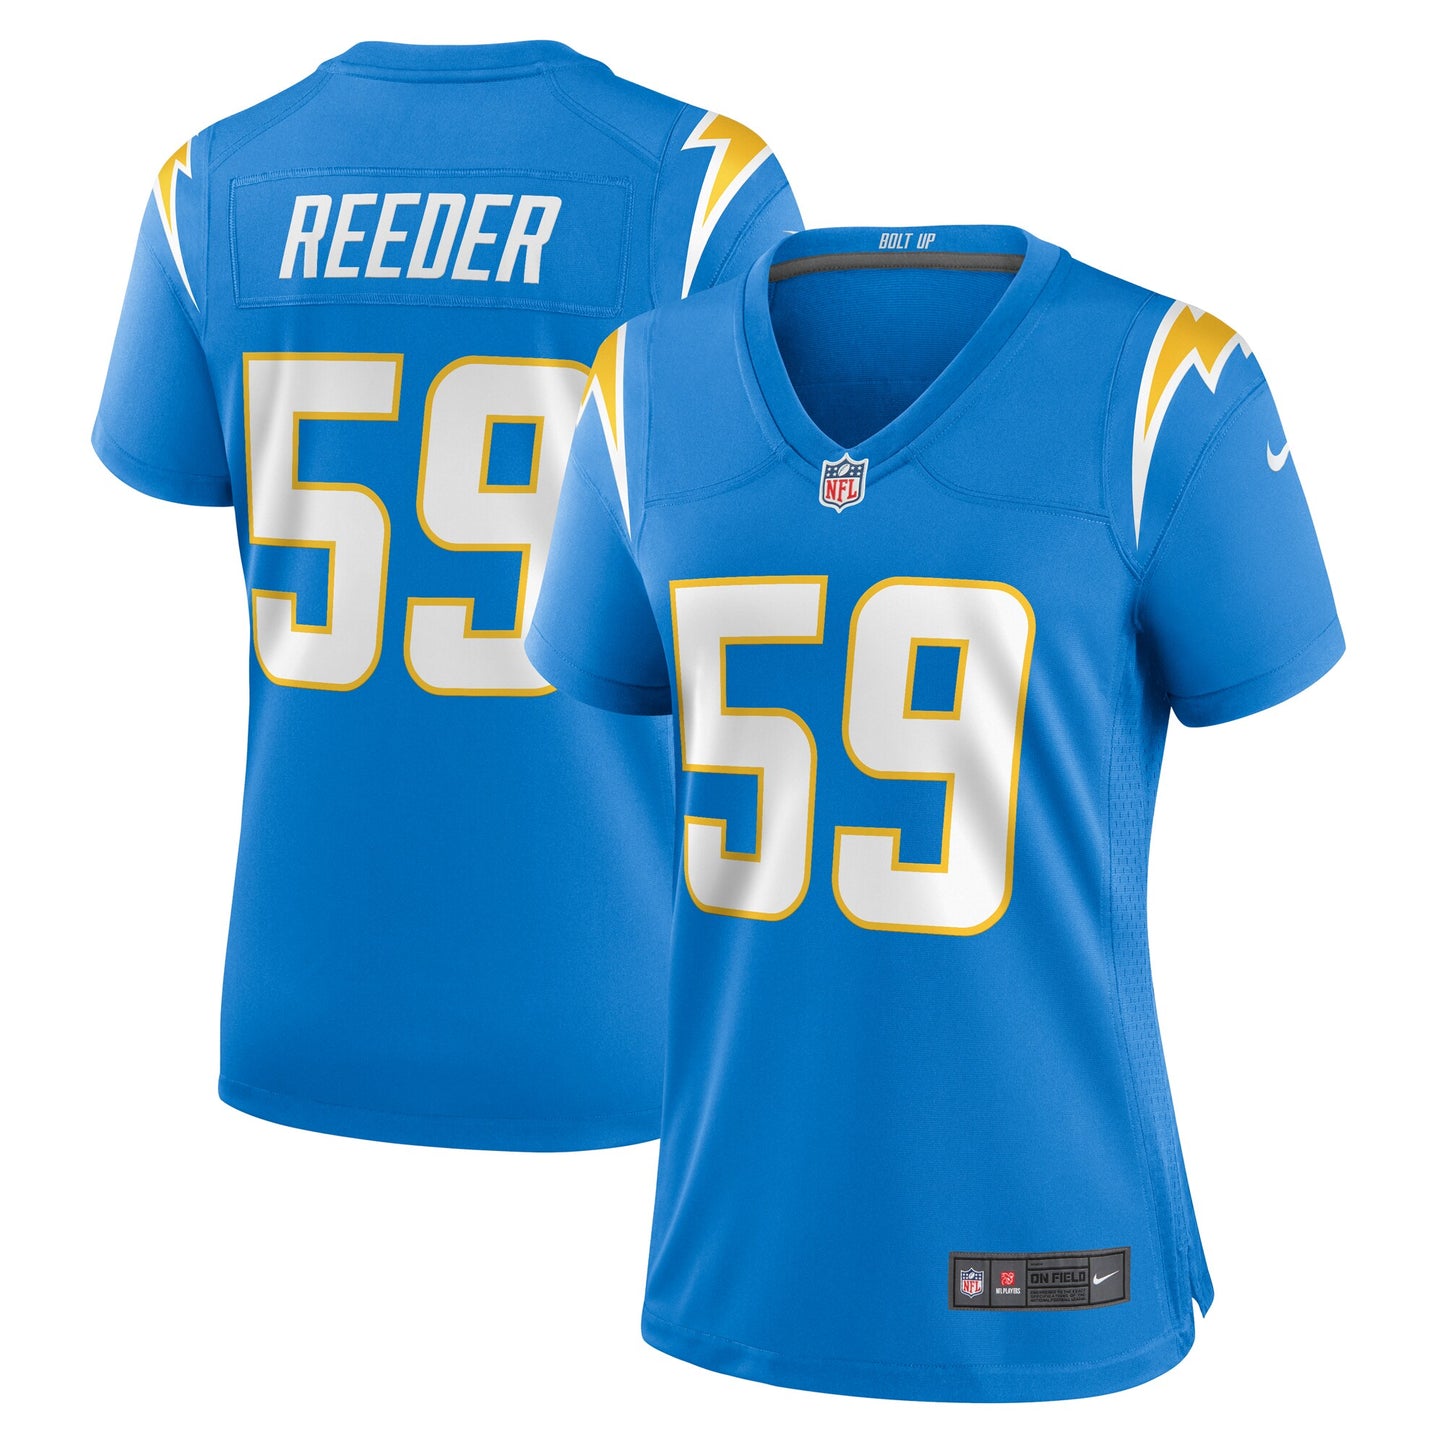 Troy Reeder Los Angeles Chargers Nike Women's Team Game Jersey - Powder Blue